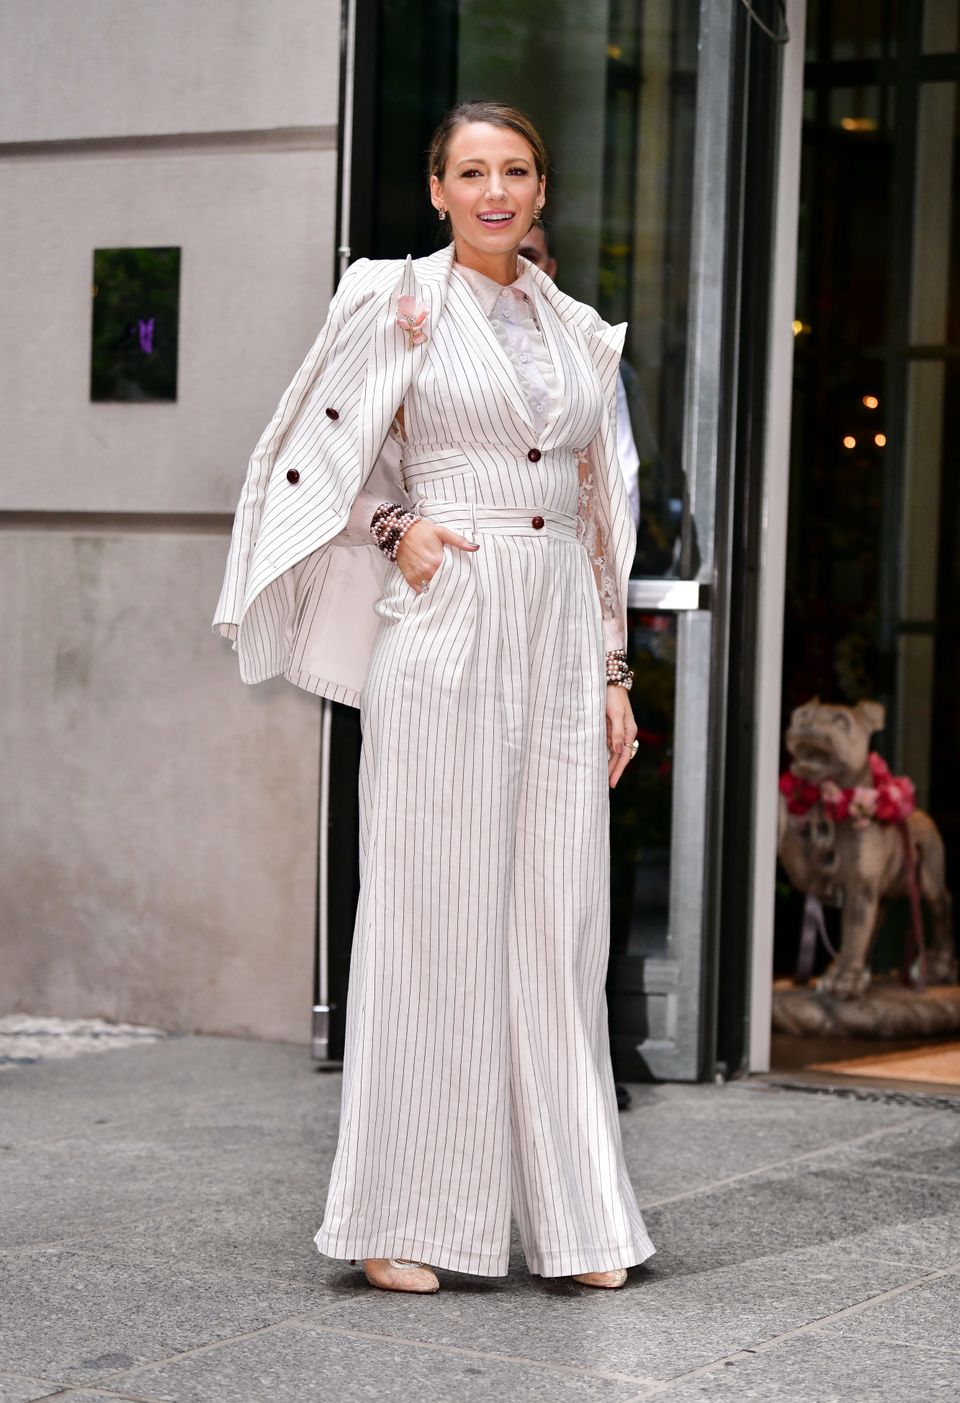 The Gorgeous Suits Blake Lively Has Worn On 'A Simple Favor' Promo Tour |  HuffPost Life